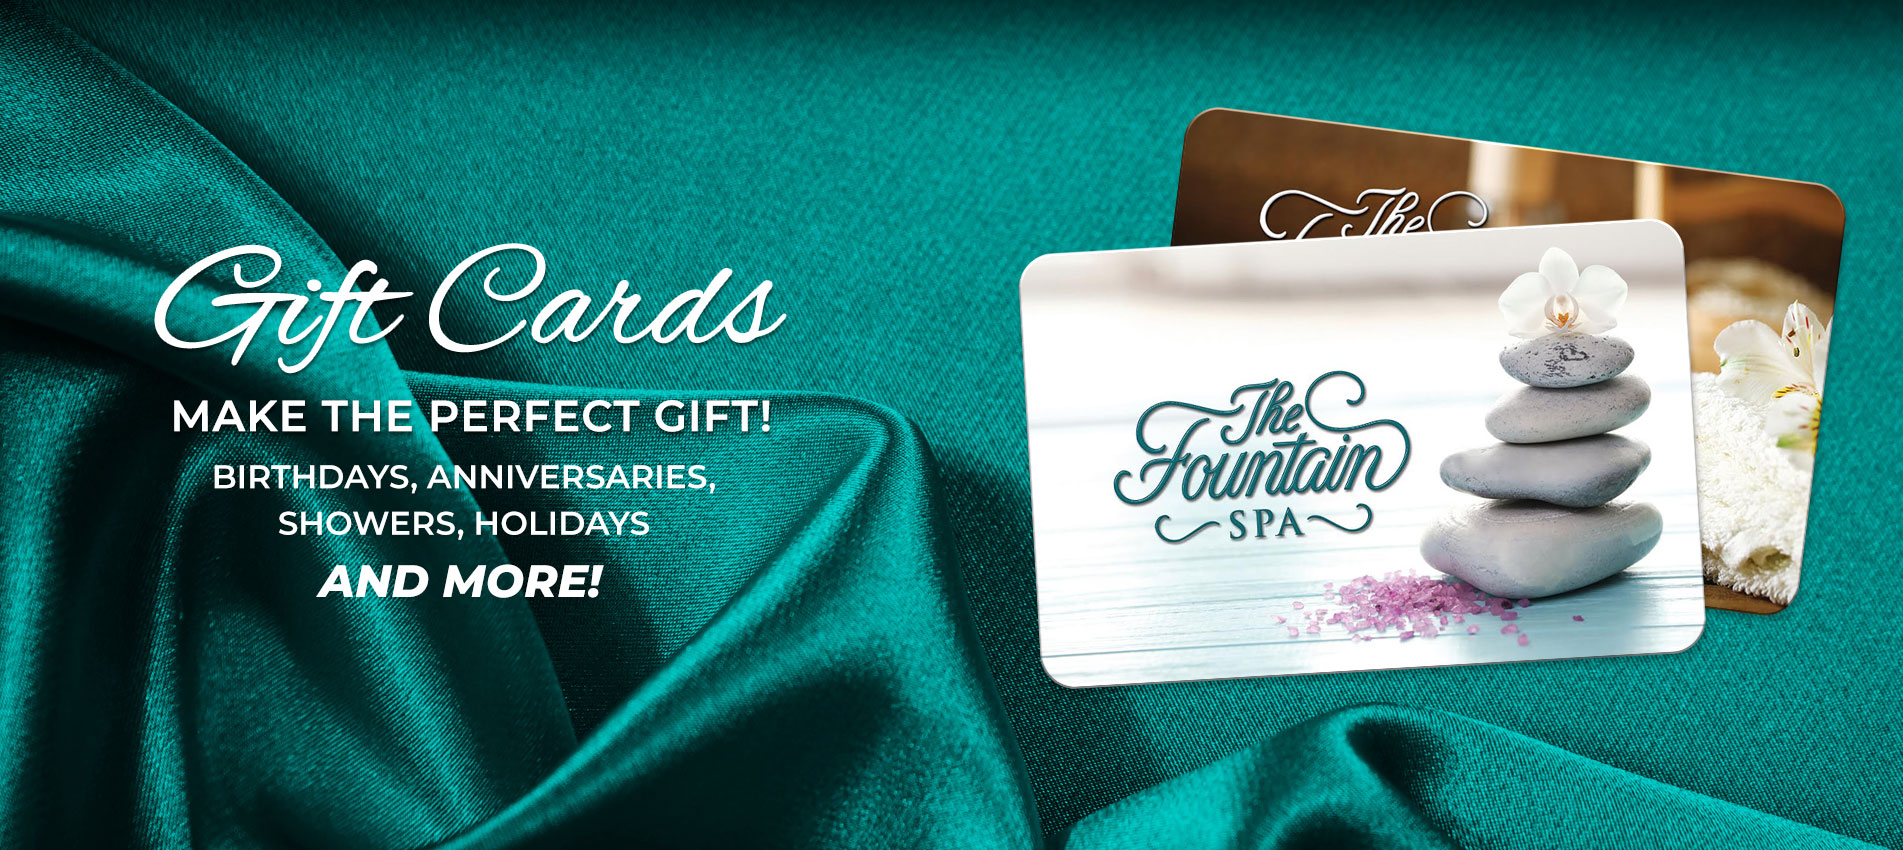 Fountain Spa Gift Cards Make The Perfect Gift!